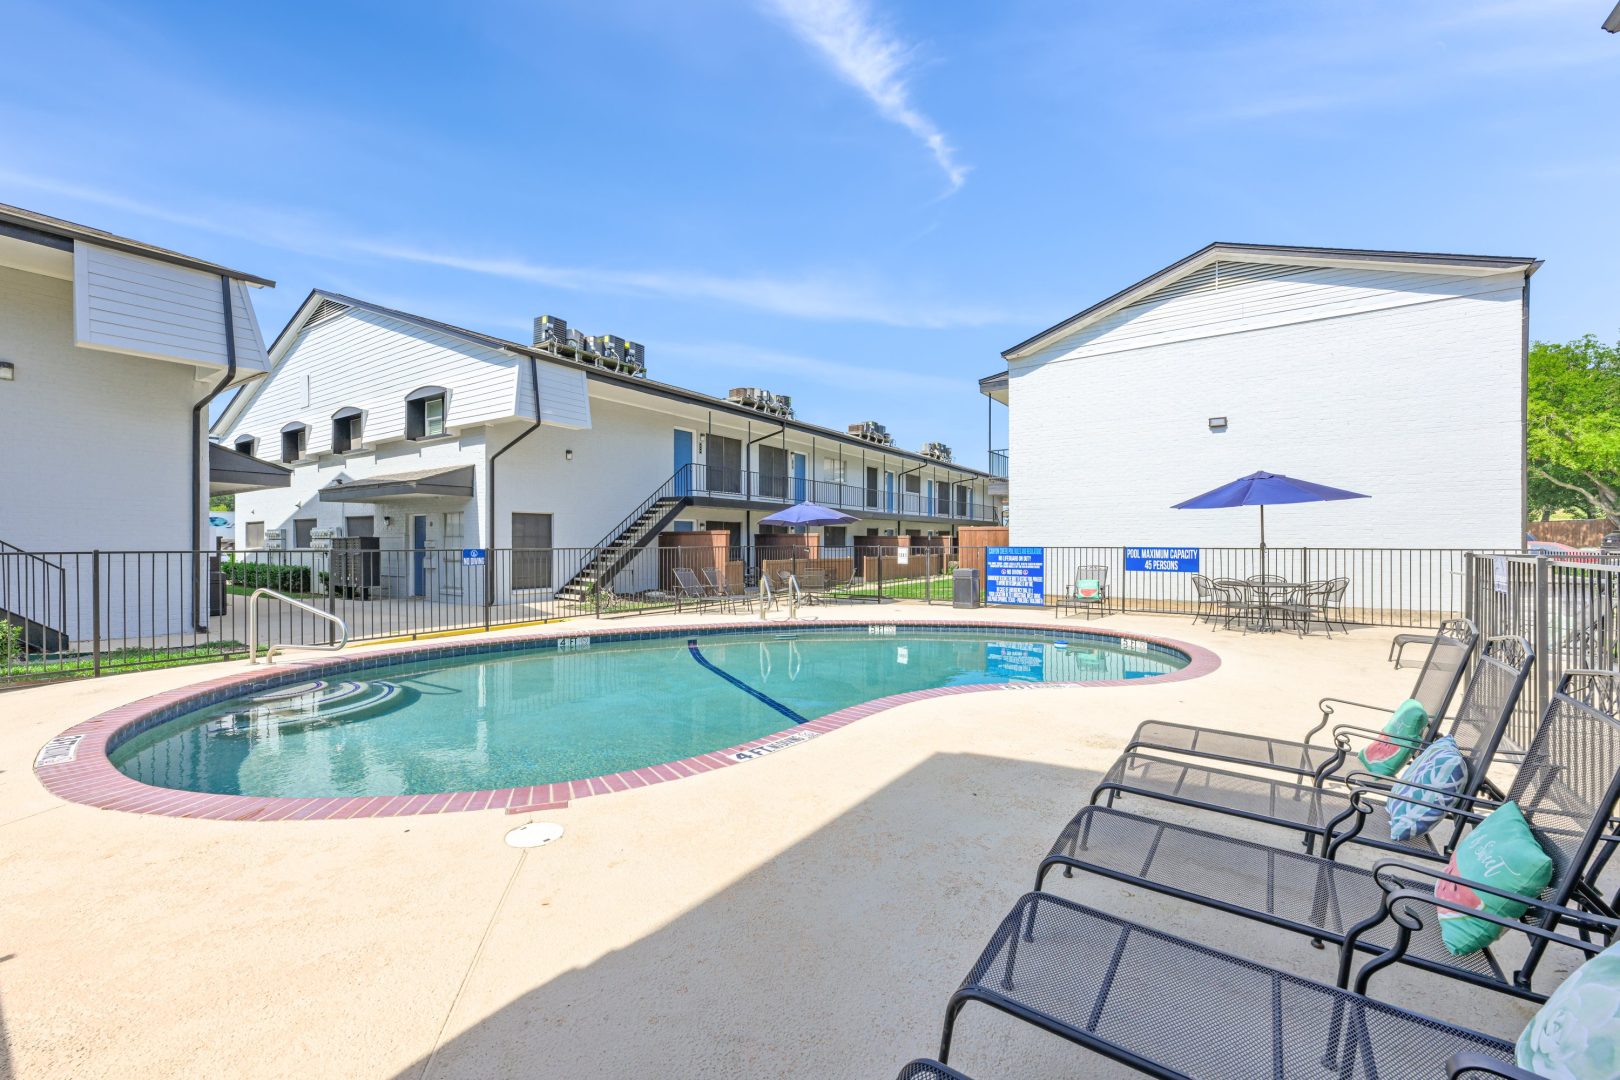 the pool at The Canyon Creek Apartments